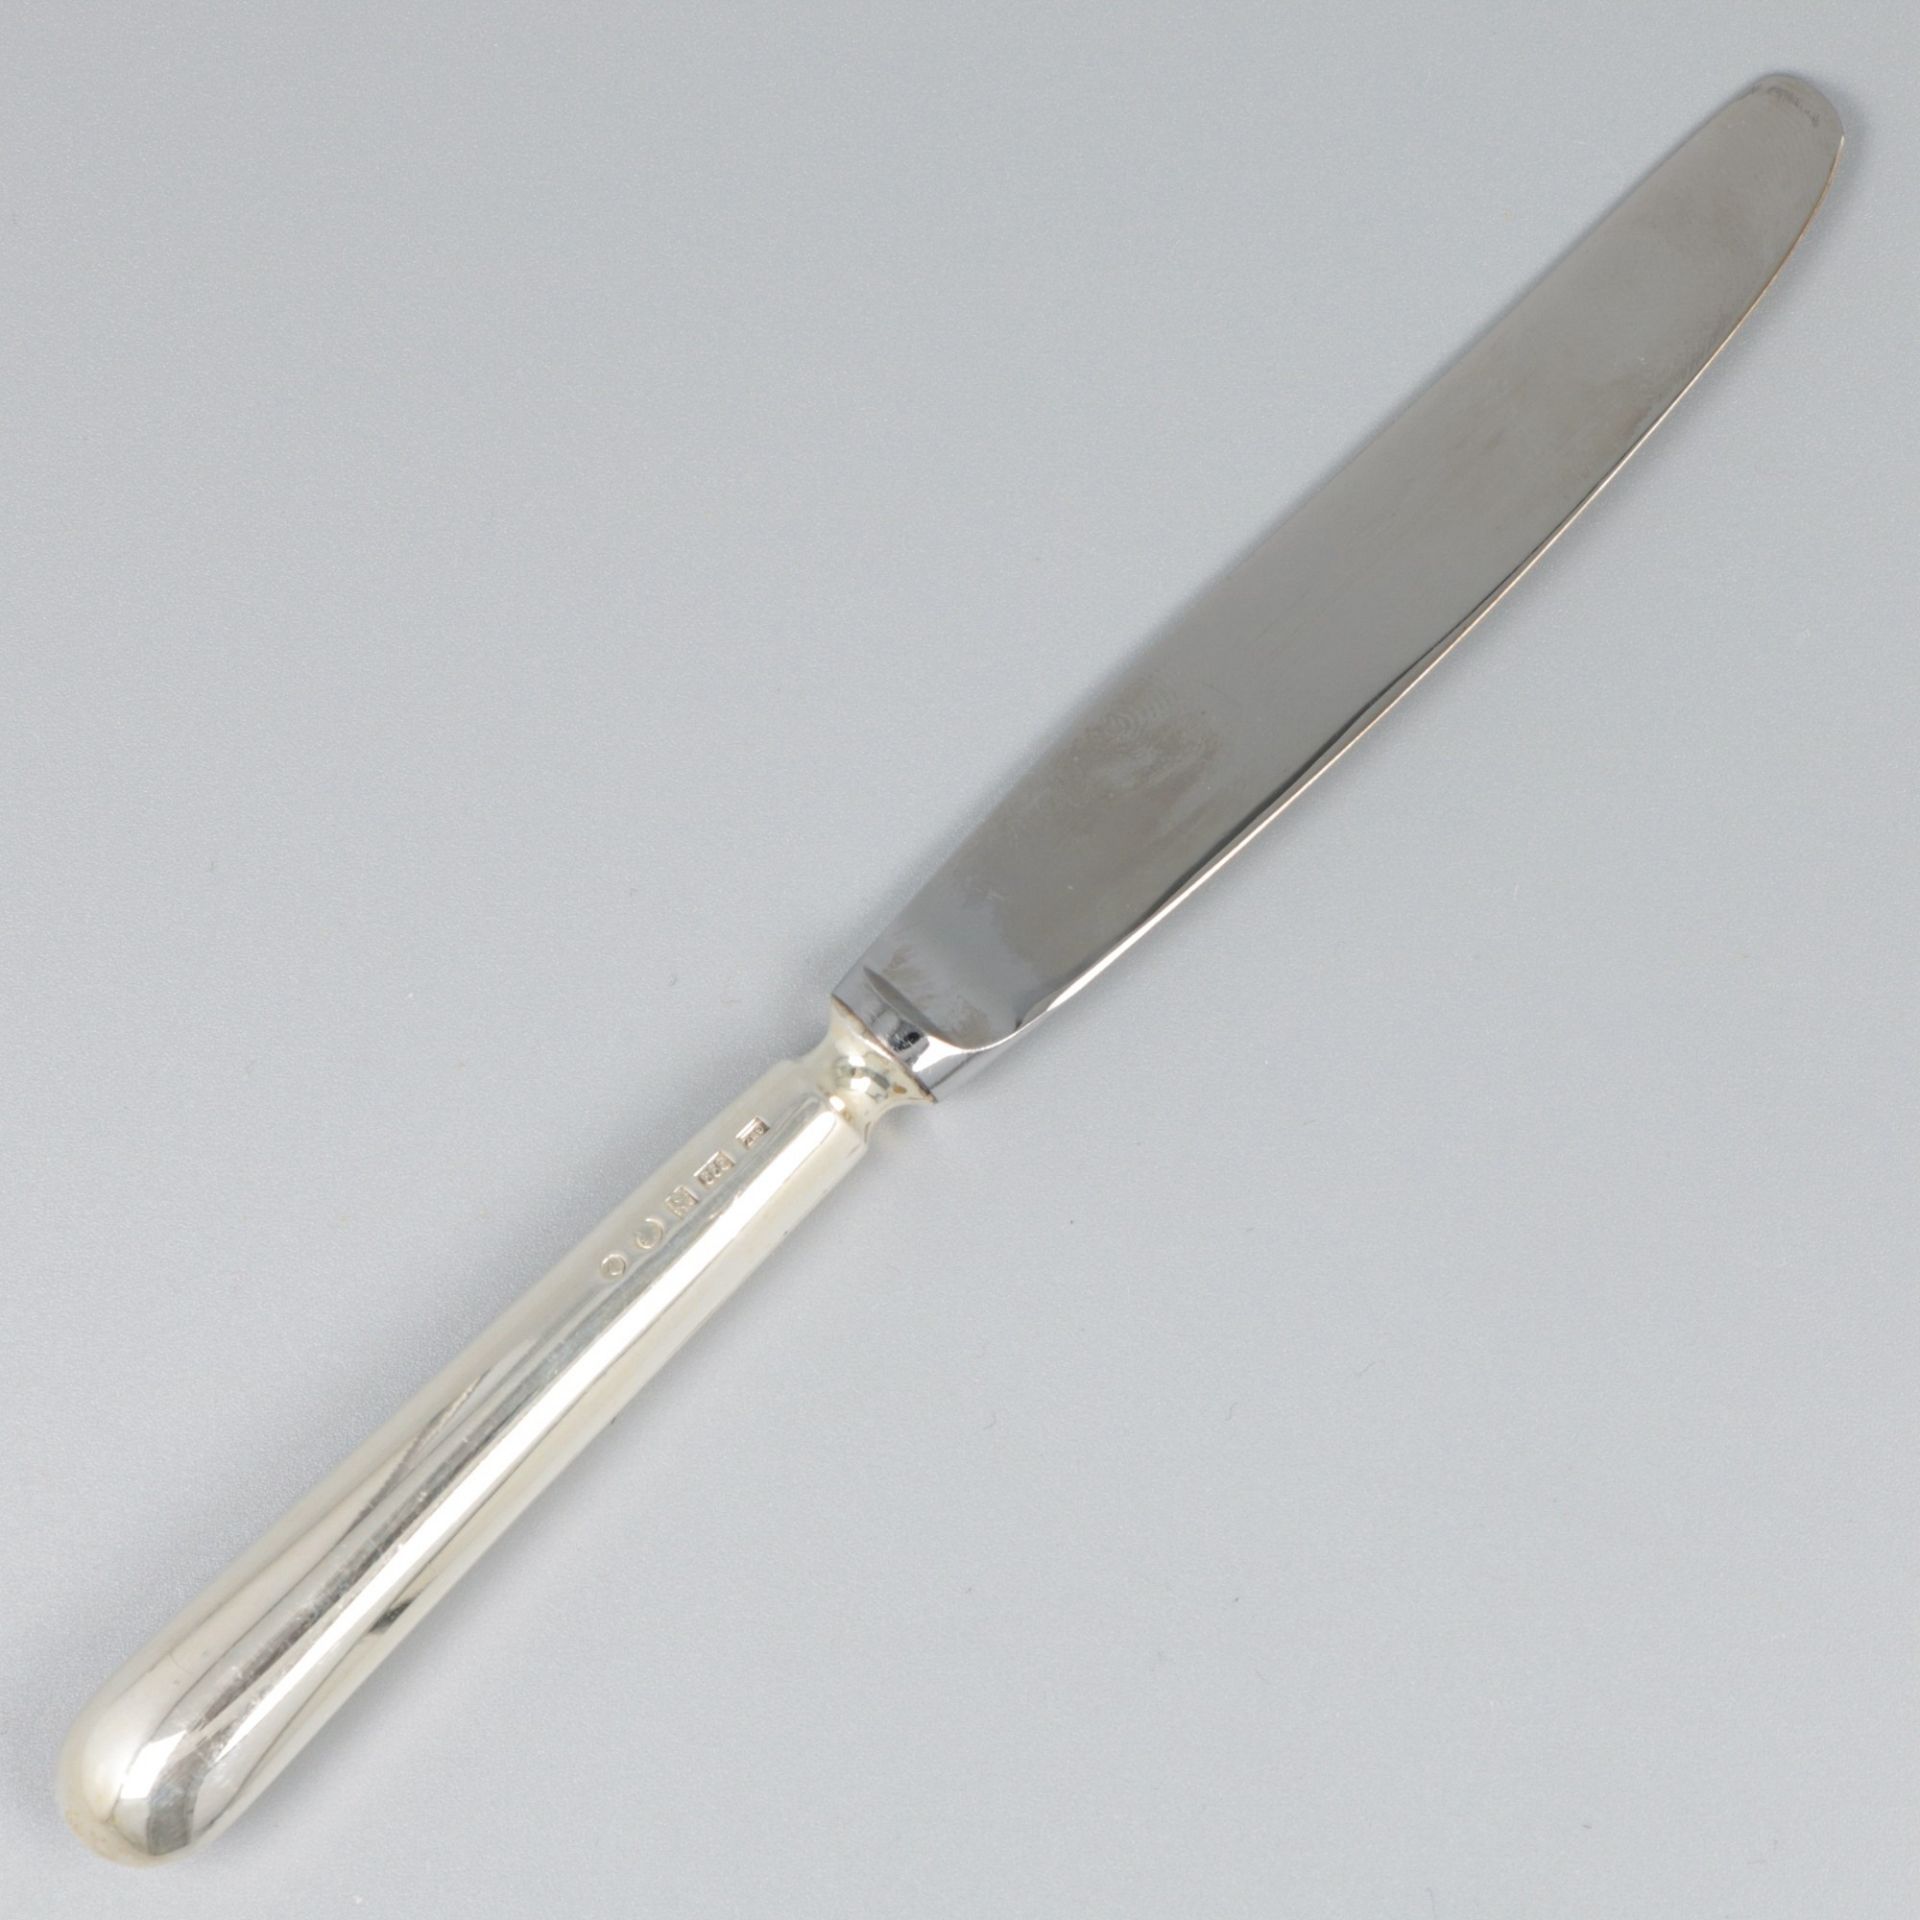 6-piece set of fruit knives silver. - Image 4 of 9